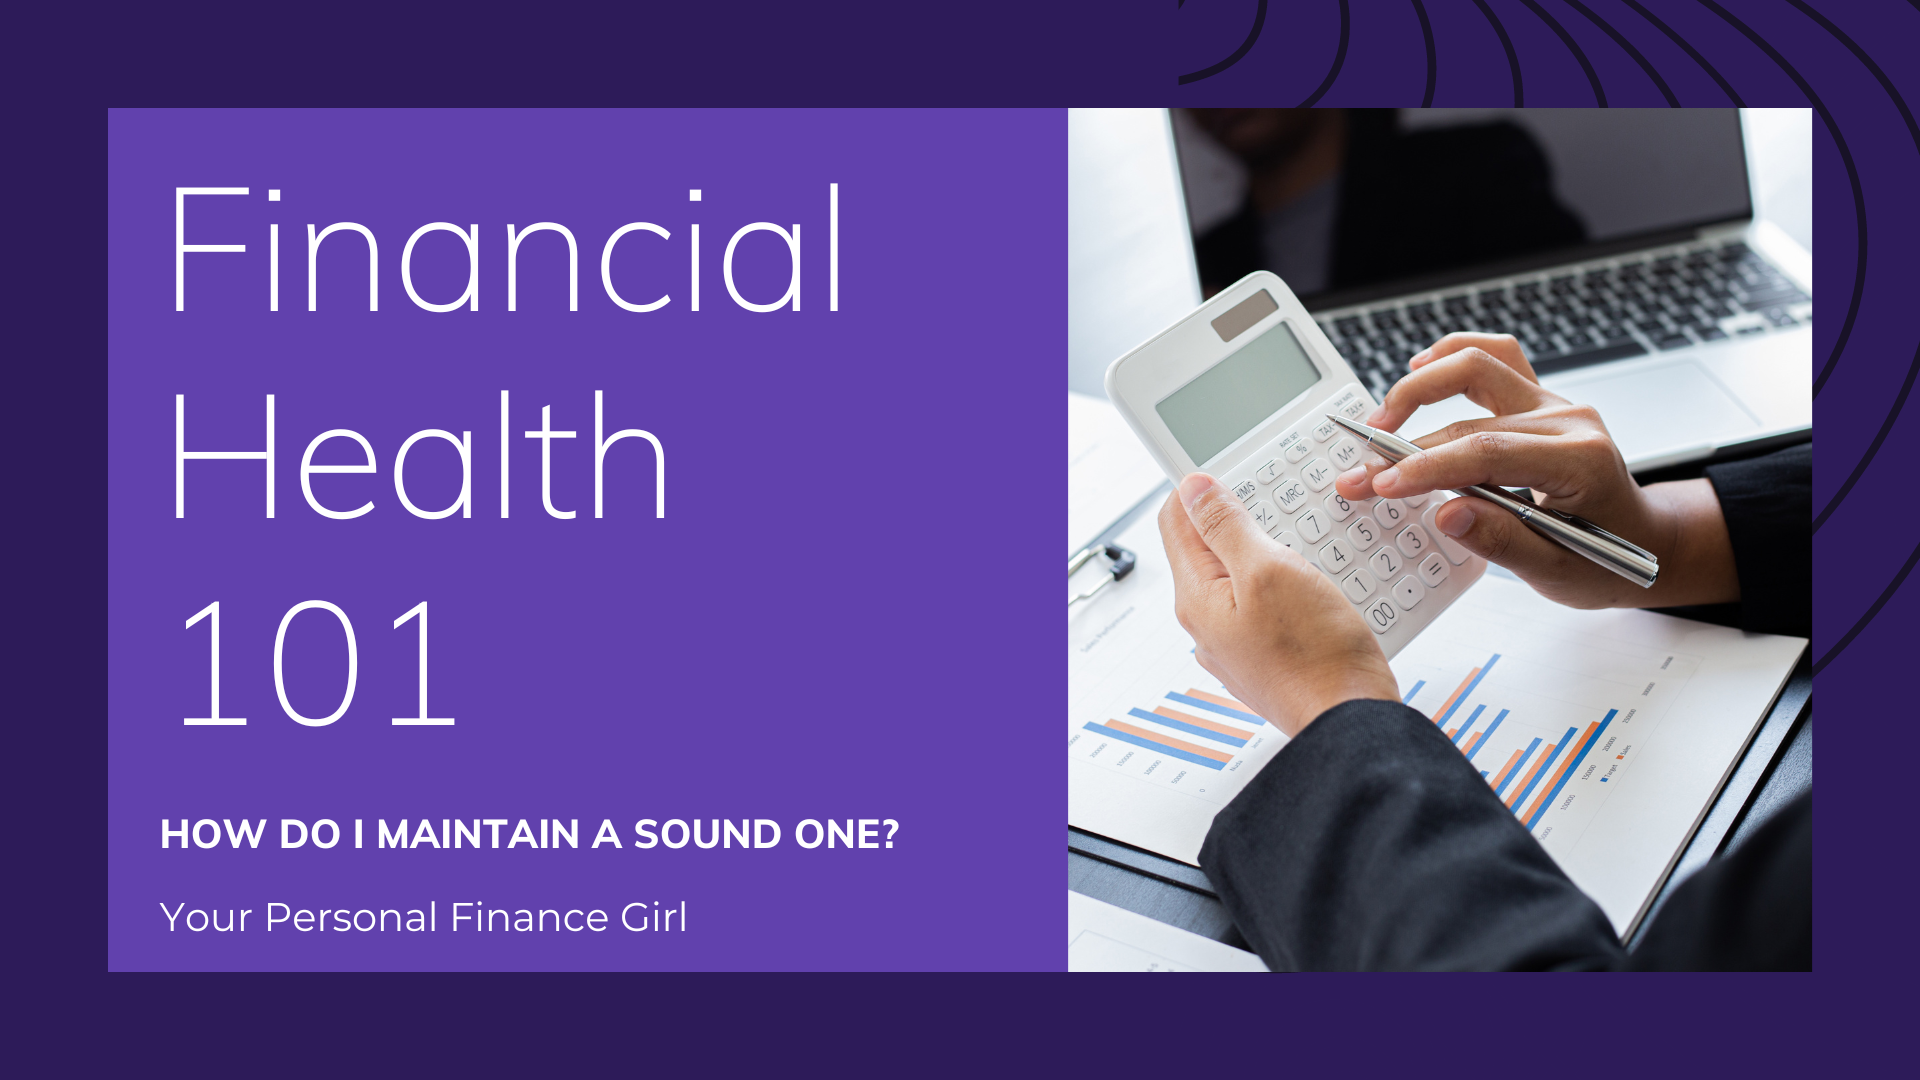 How to improve financial health